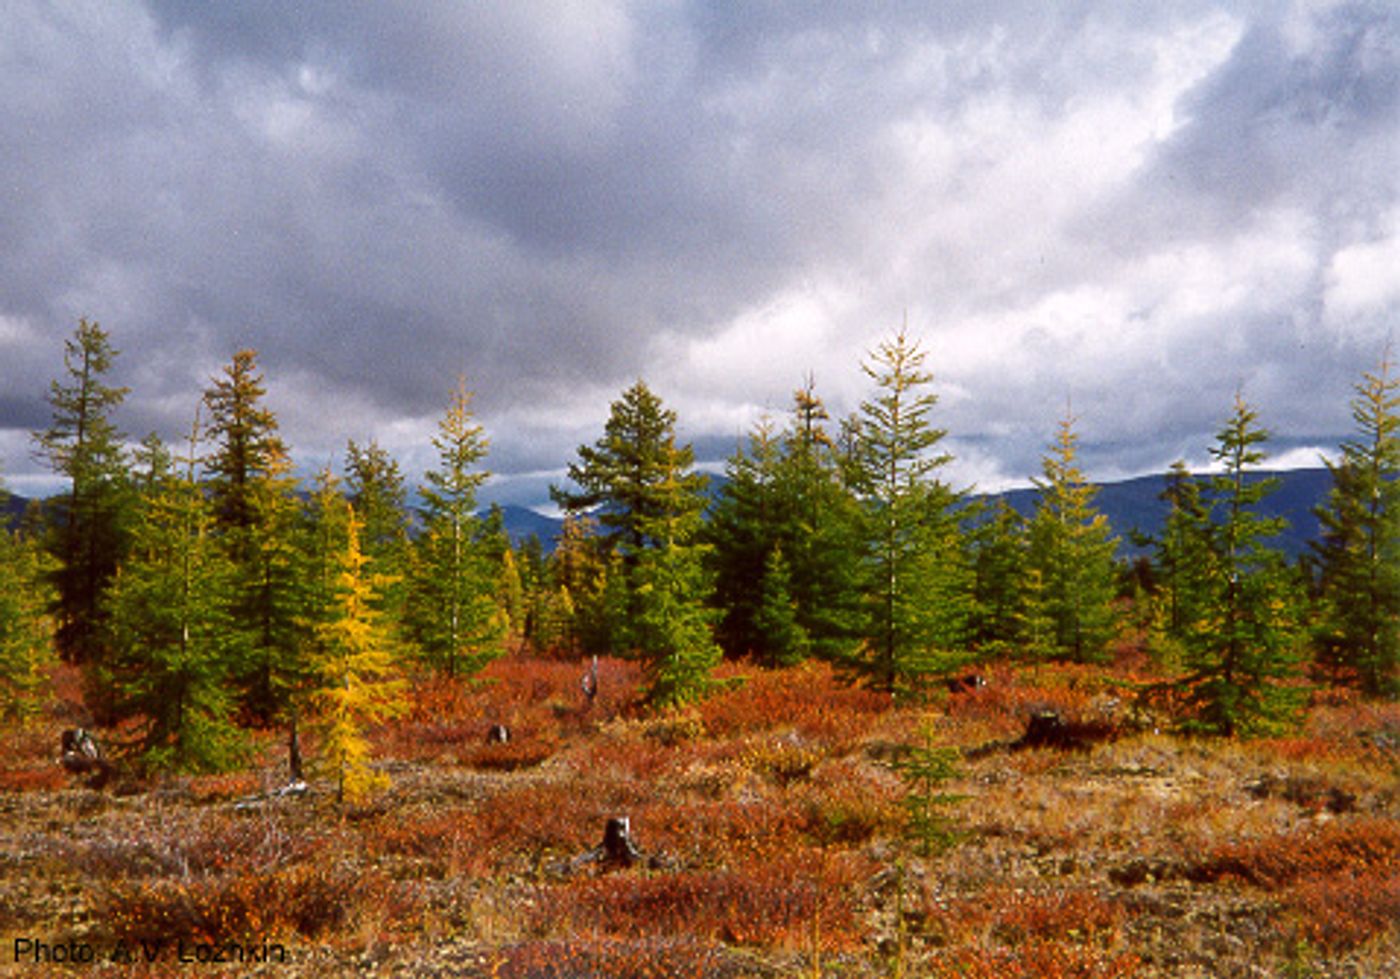 The Dahurian larch tree is known for its ability to withstand harsh winters in the northern boreal forests. Photo: Wikipedia